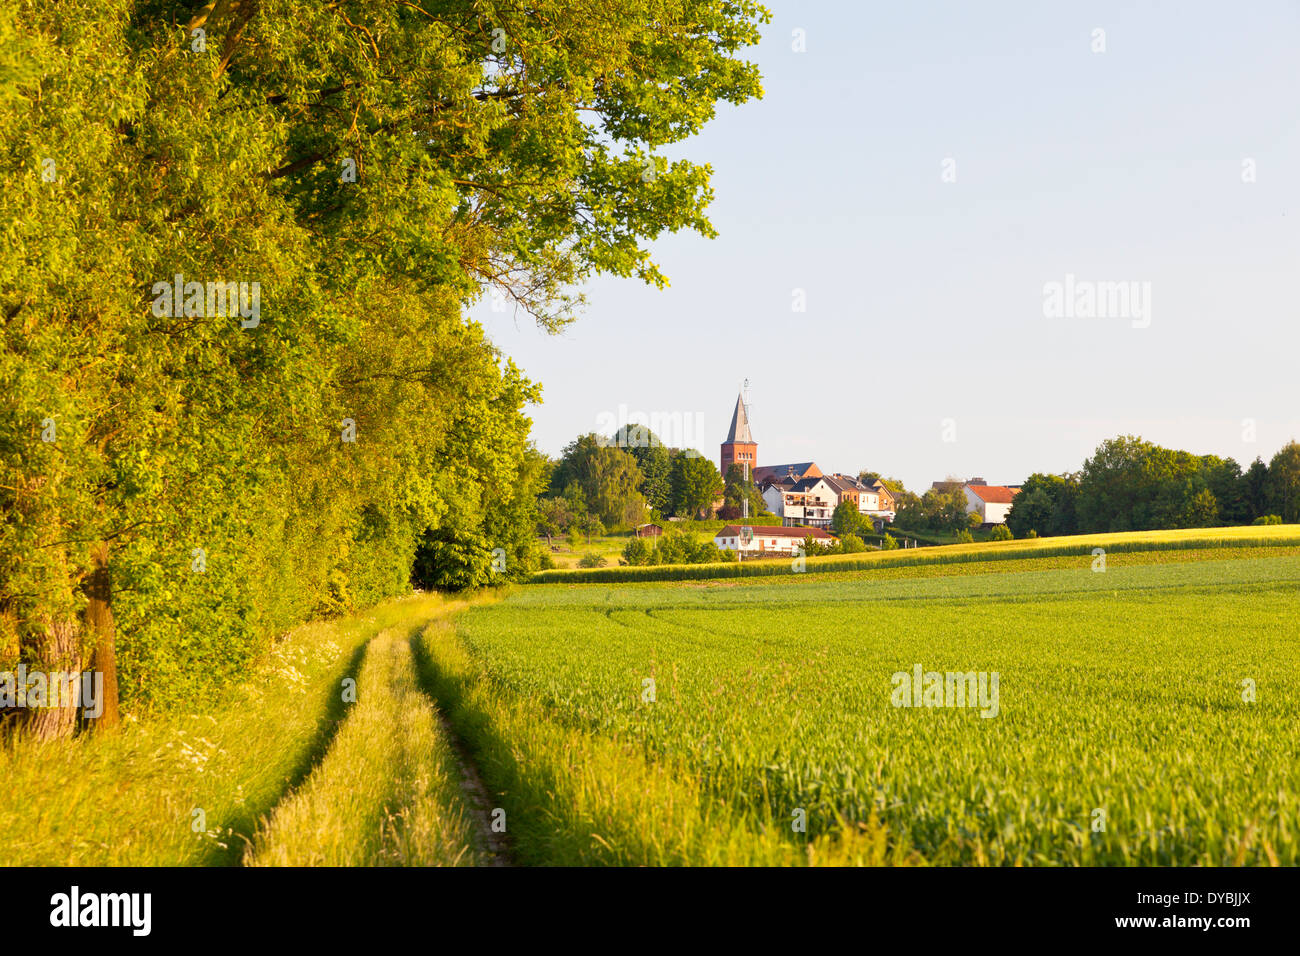 Dirt road and field with a village in the background. Stock Photo